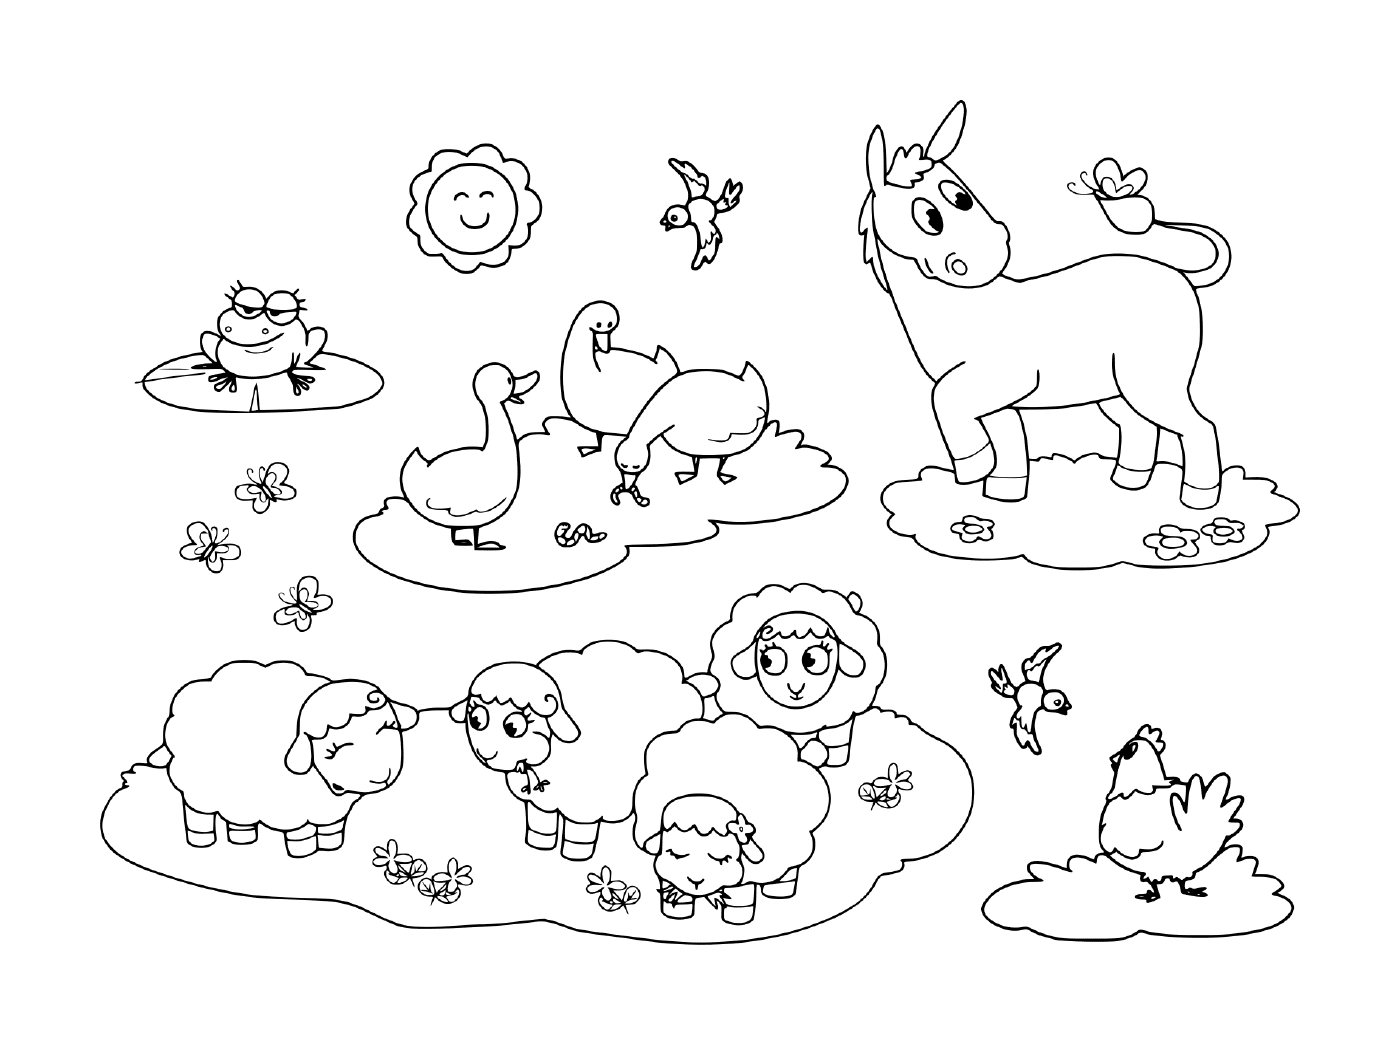  a group of animals in the grass, including a donkey, a goose, a hen, sheep and a frog 